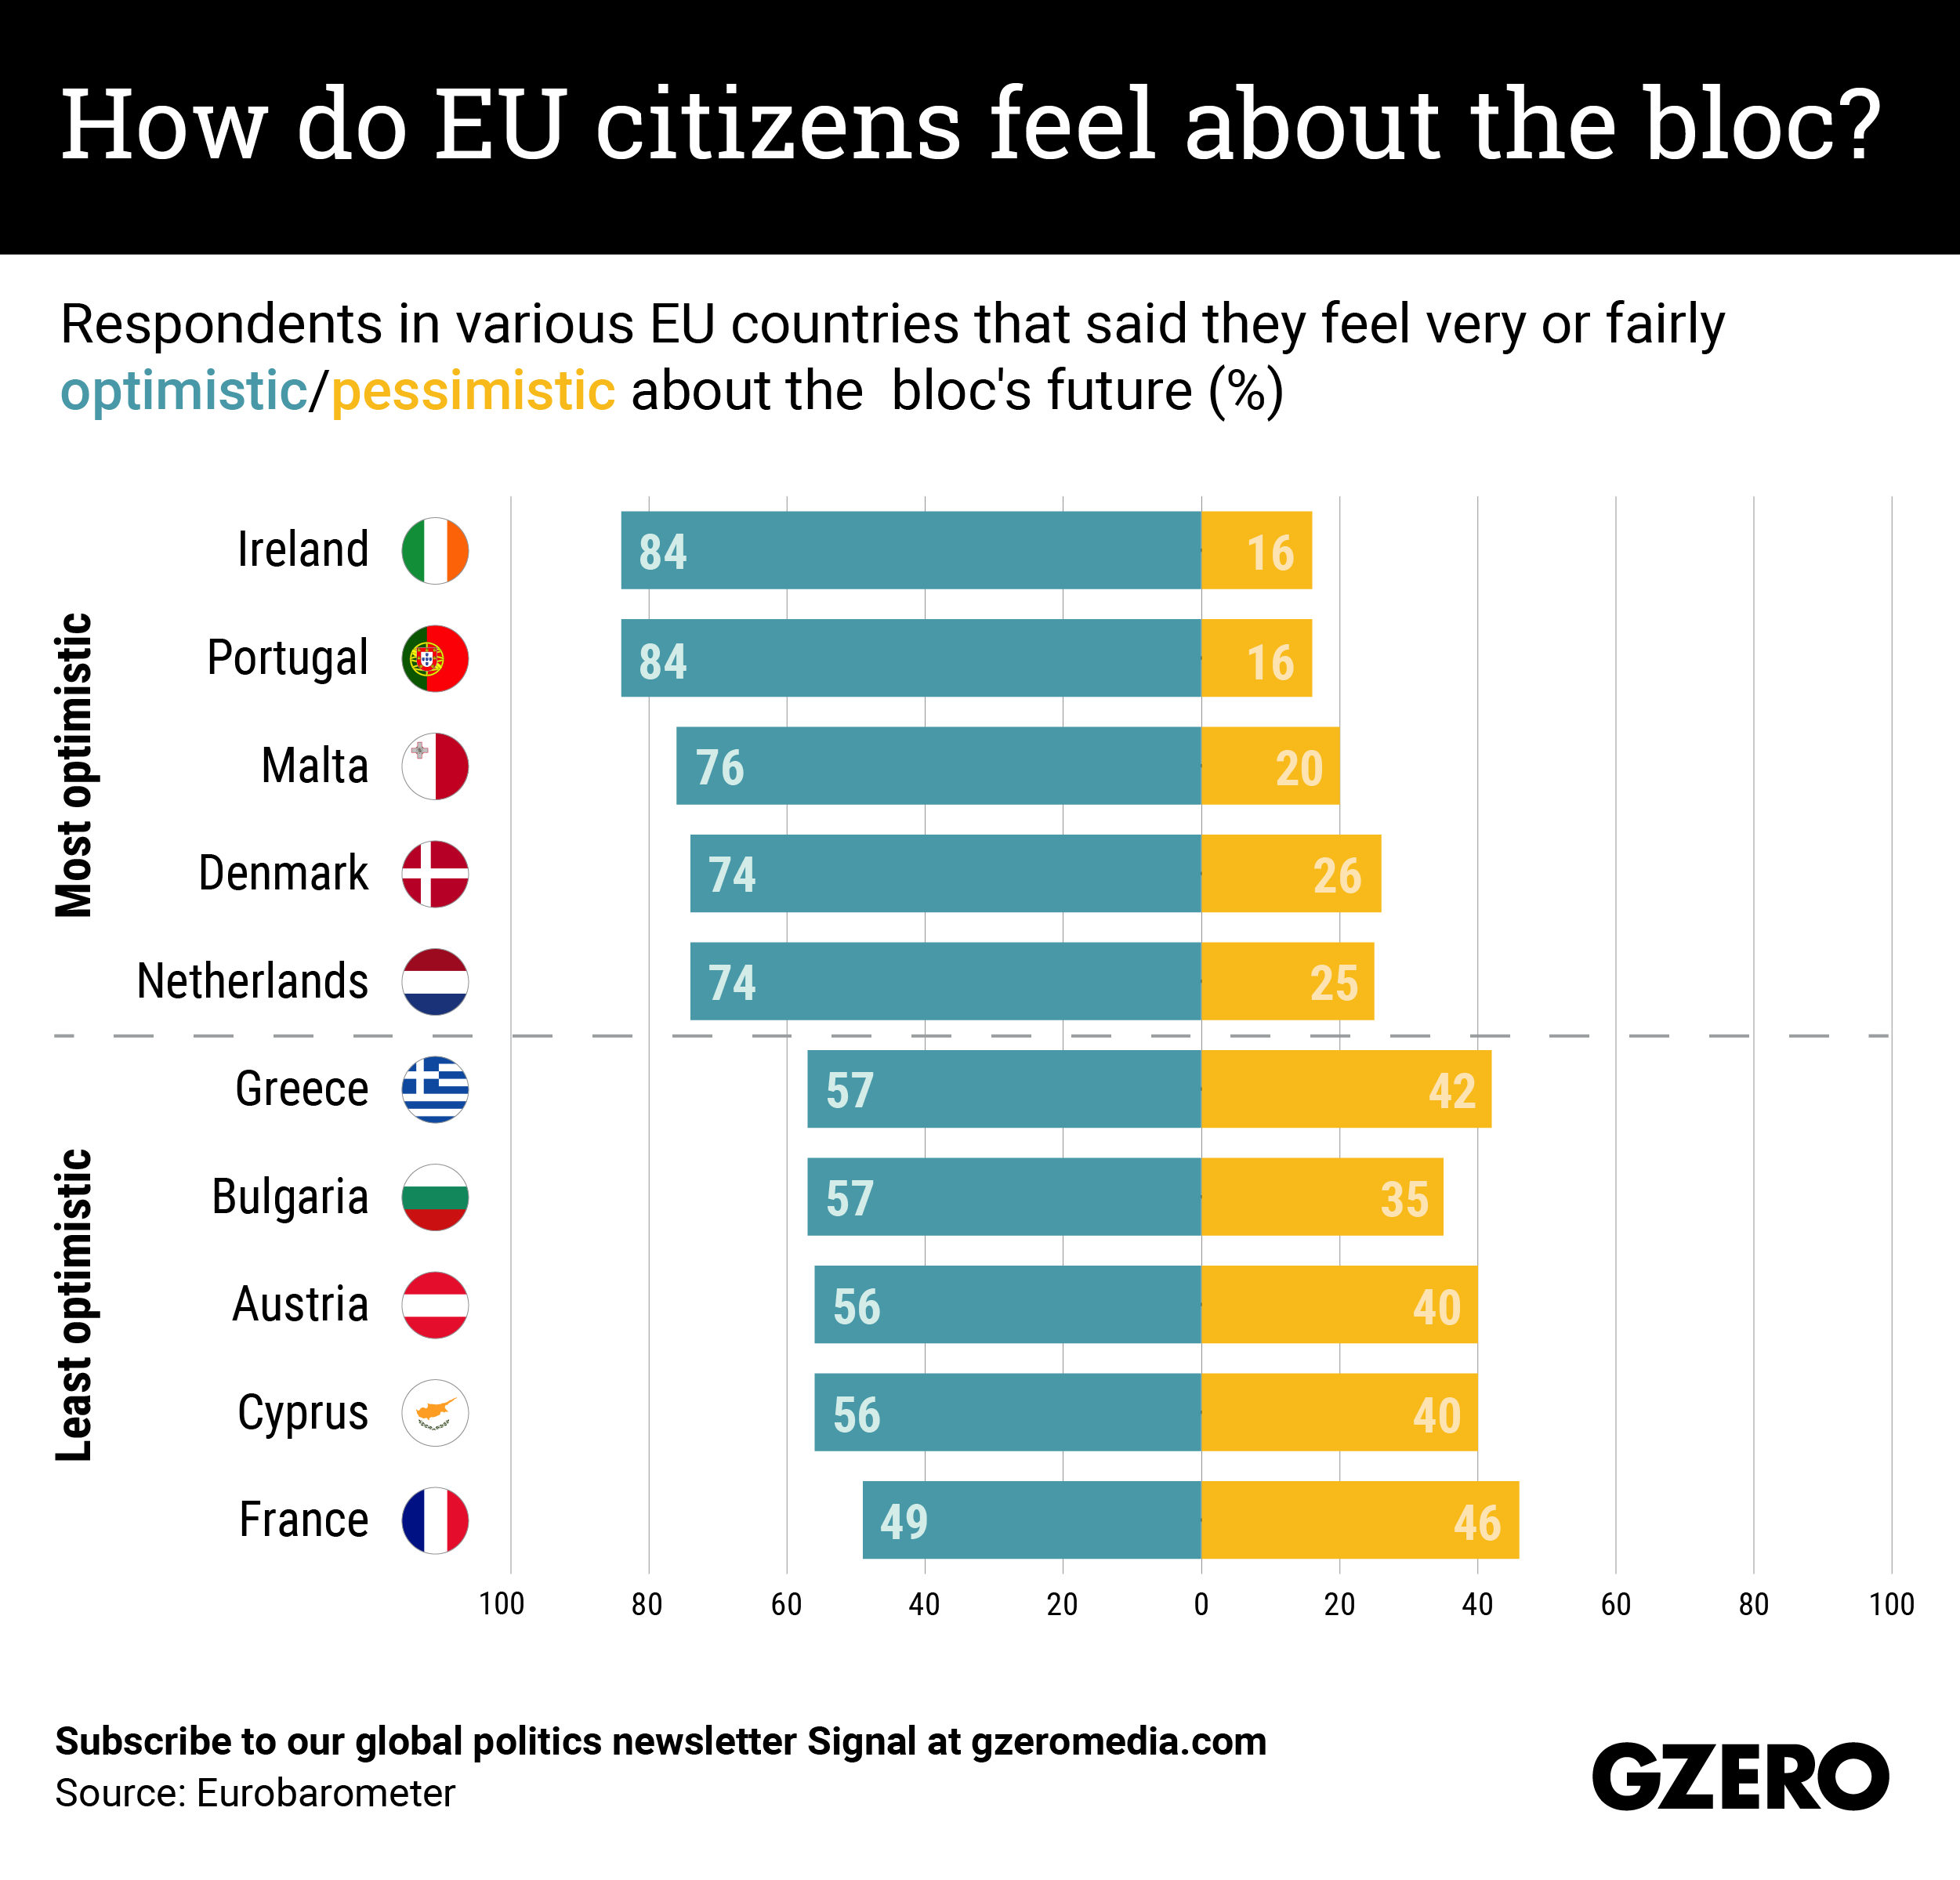 The Graphic Truth: How do EU citizens feel about the bloc?